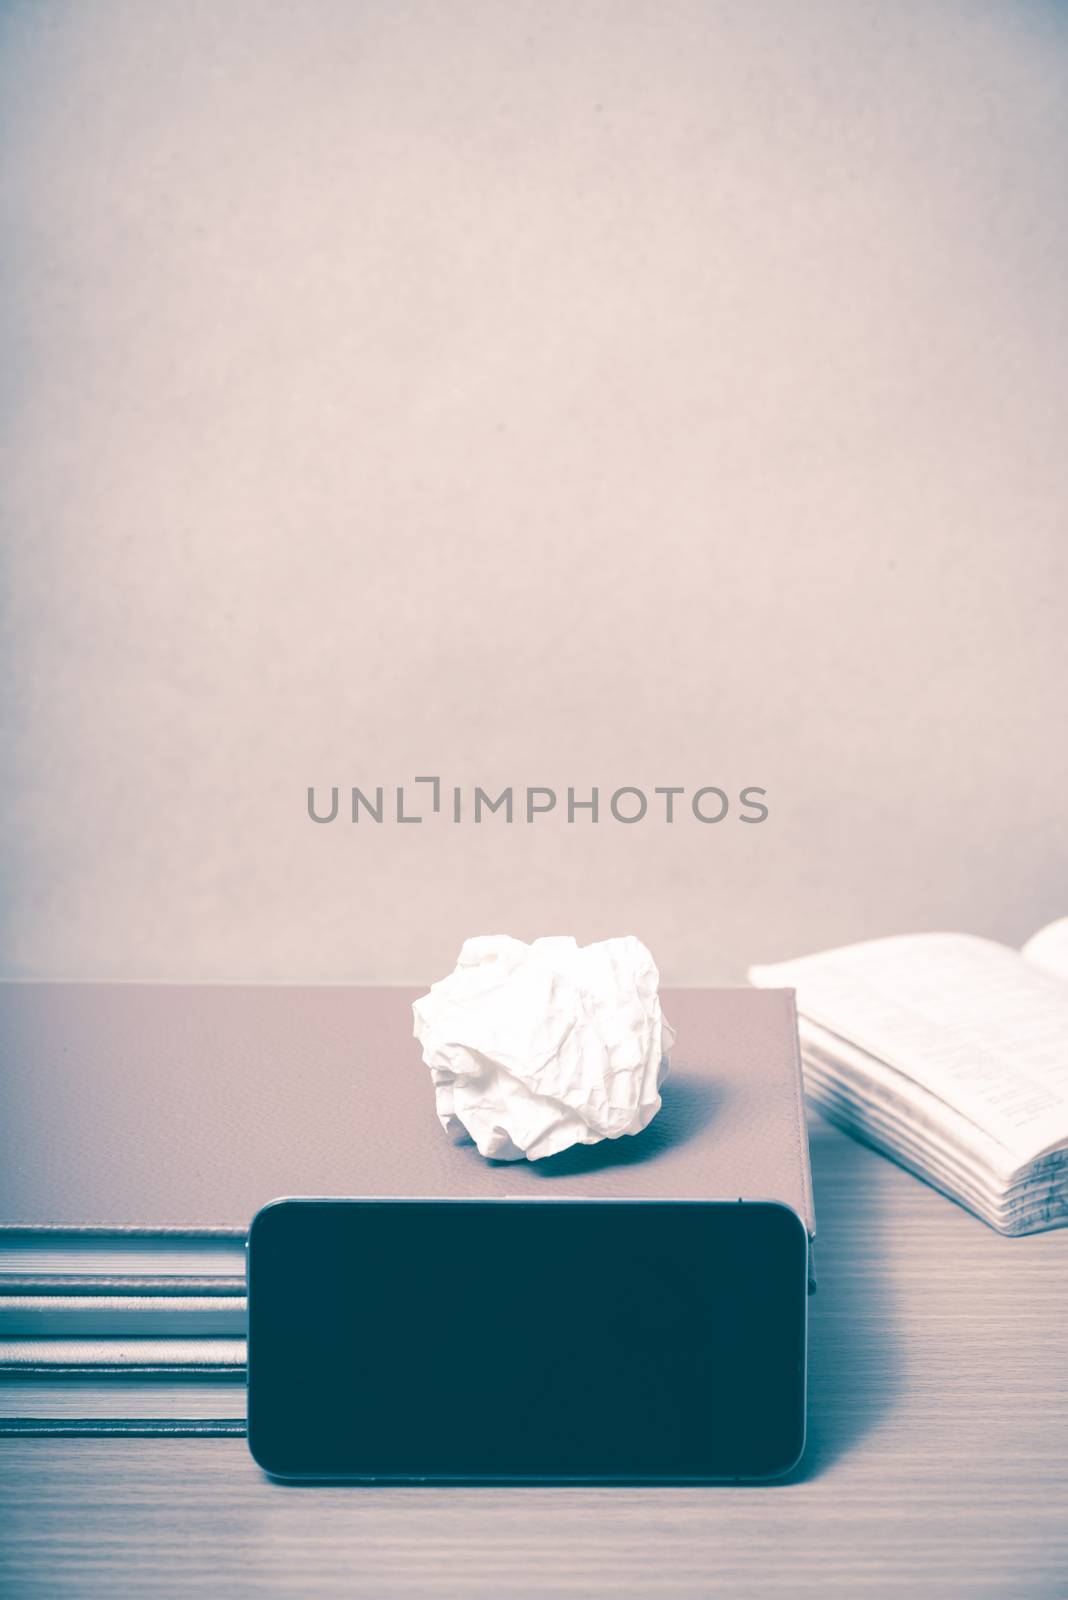 stack of book with smart phone on wood background vintage style